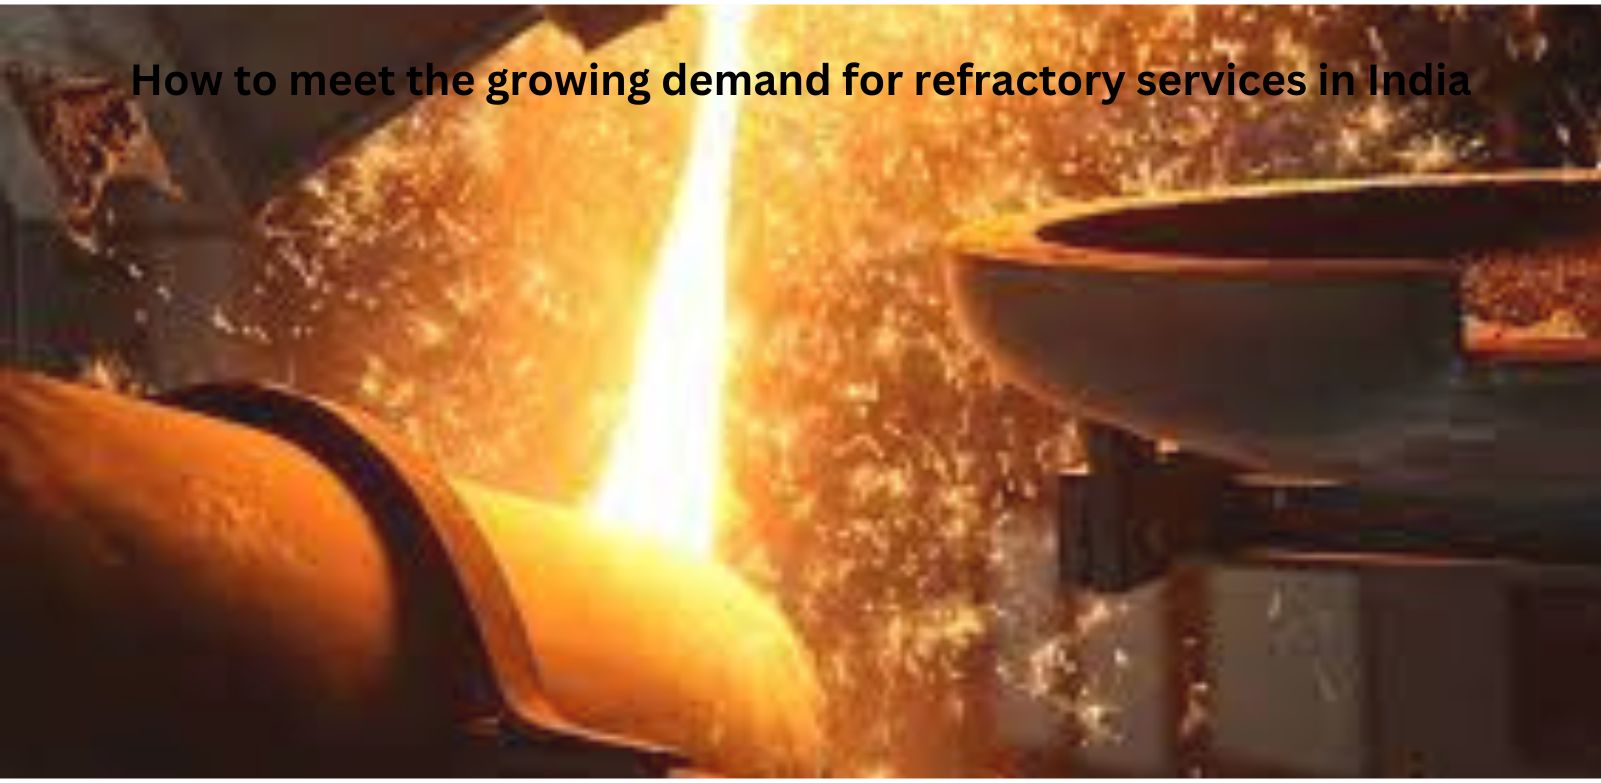 How to meet the growing demand for refractory services in India?